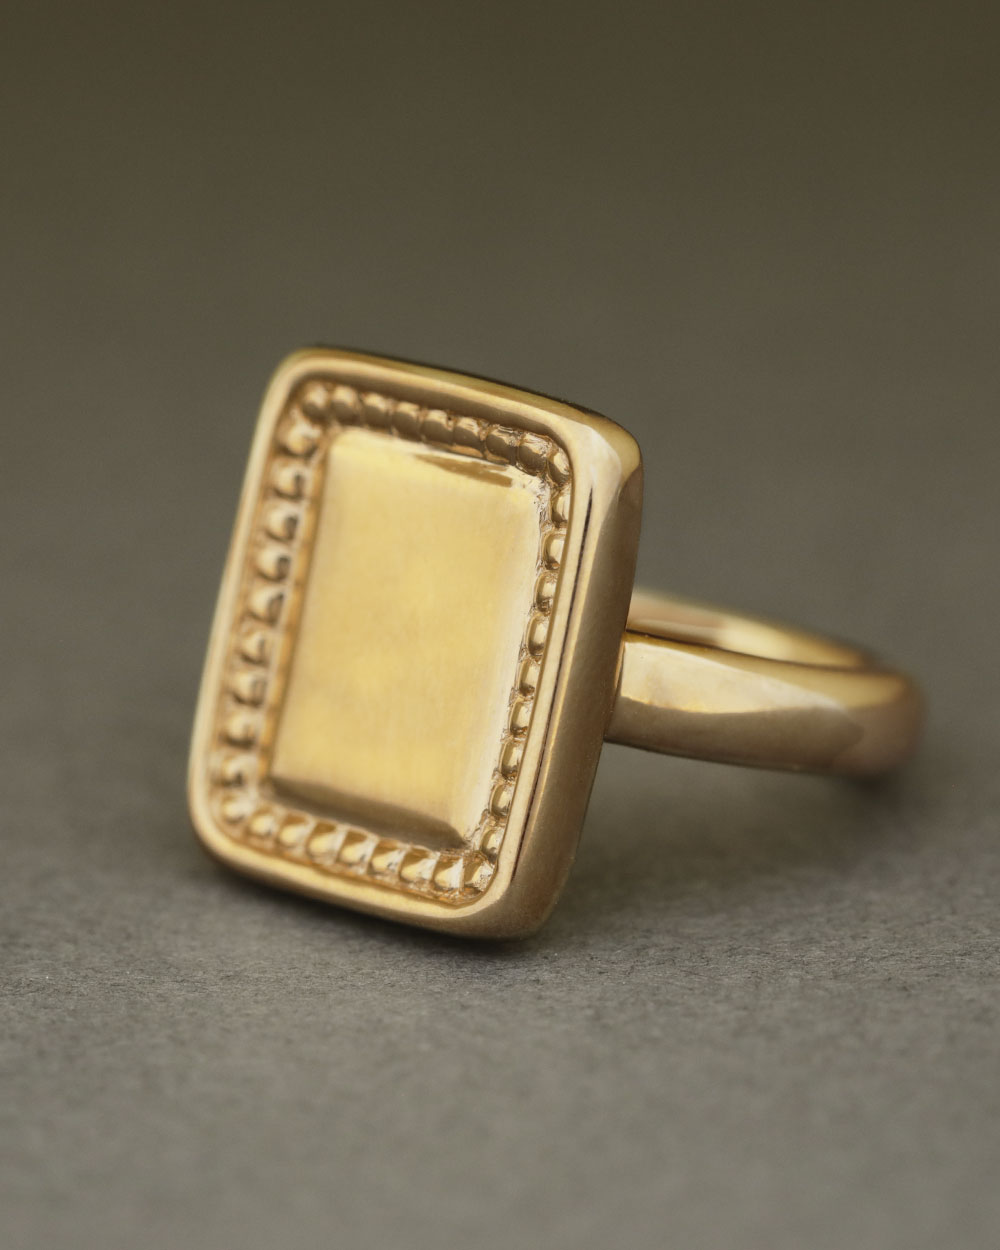 Roman Tablet Ring by George Rings solid 18k gold rectangle beaded ring